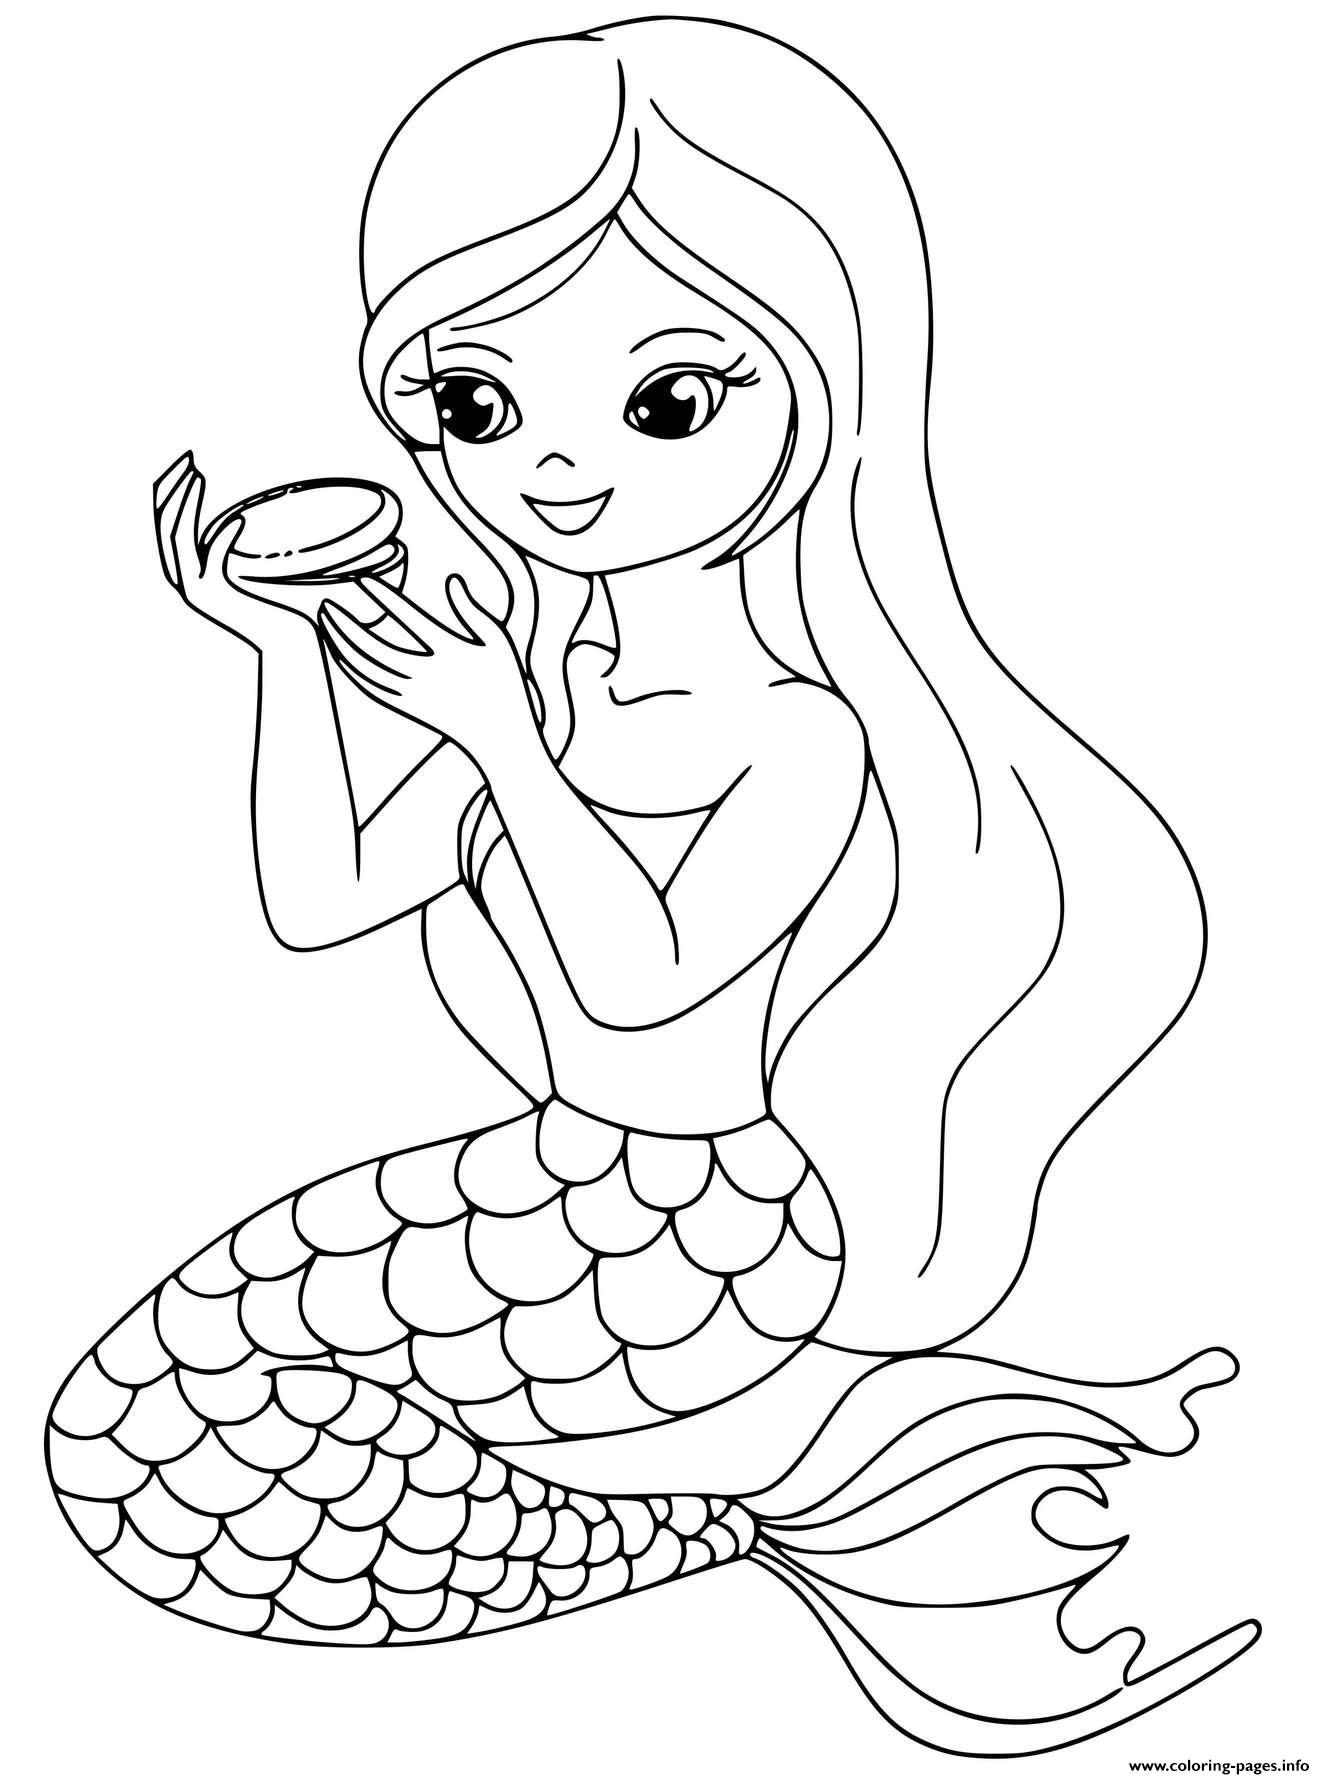 kids-free-coloring-pages-for-girls